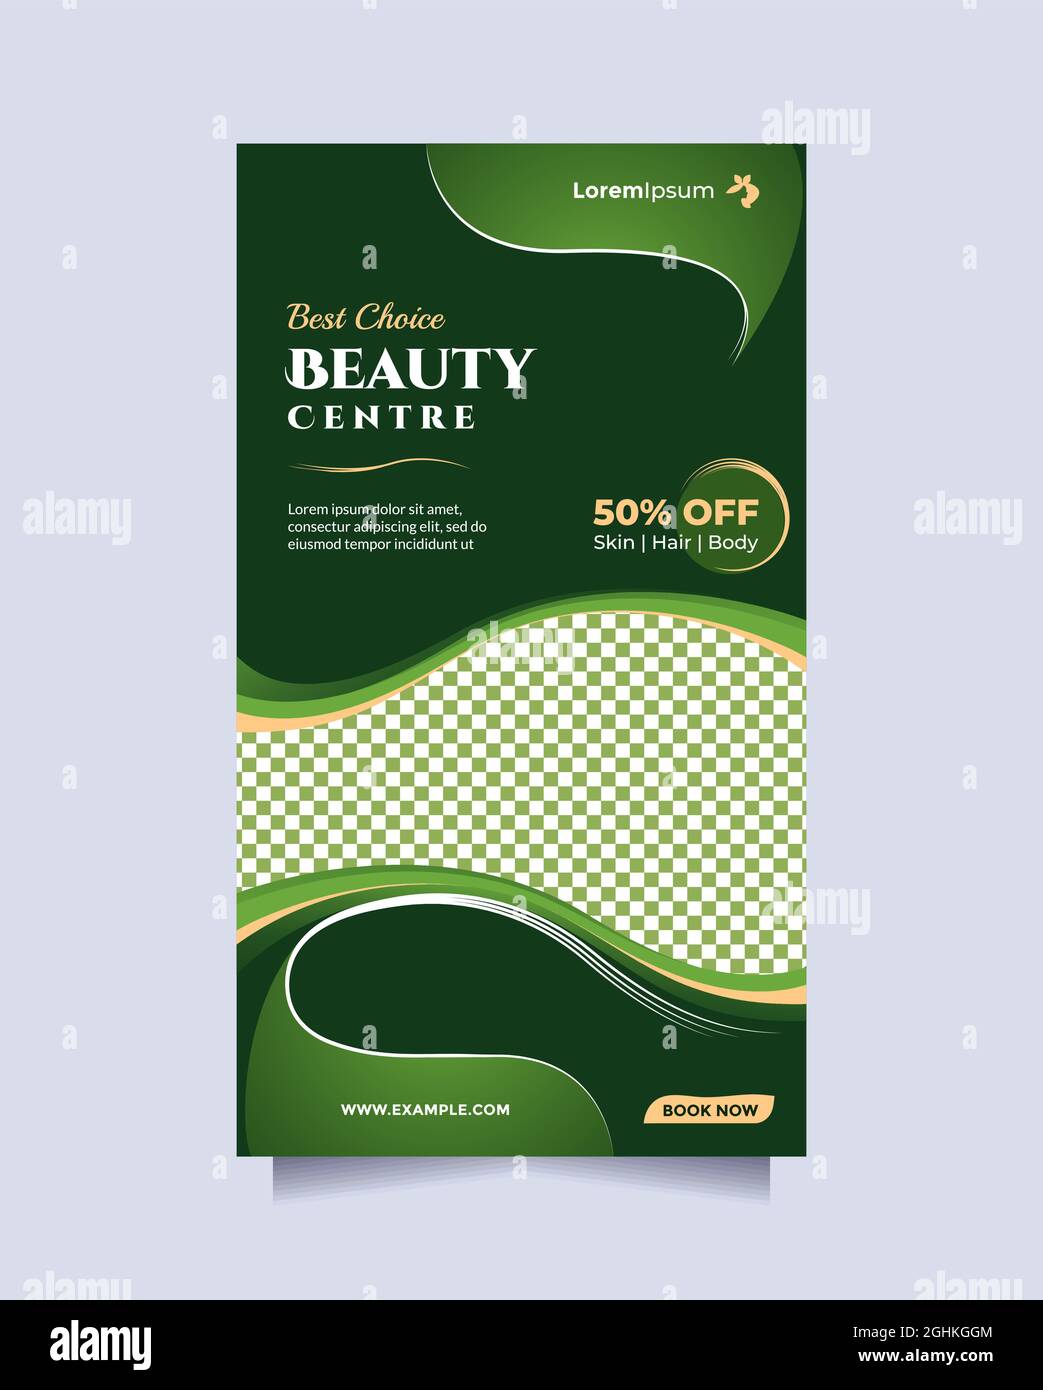 Clean and trendy beauty center social media post & banner template. Concept of professional hair beauty treatment, hair salon, something natural, etc Stock Vector